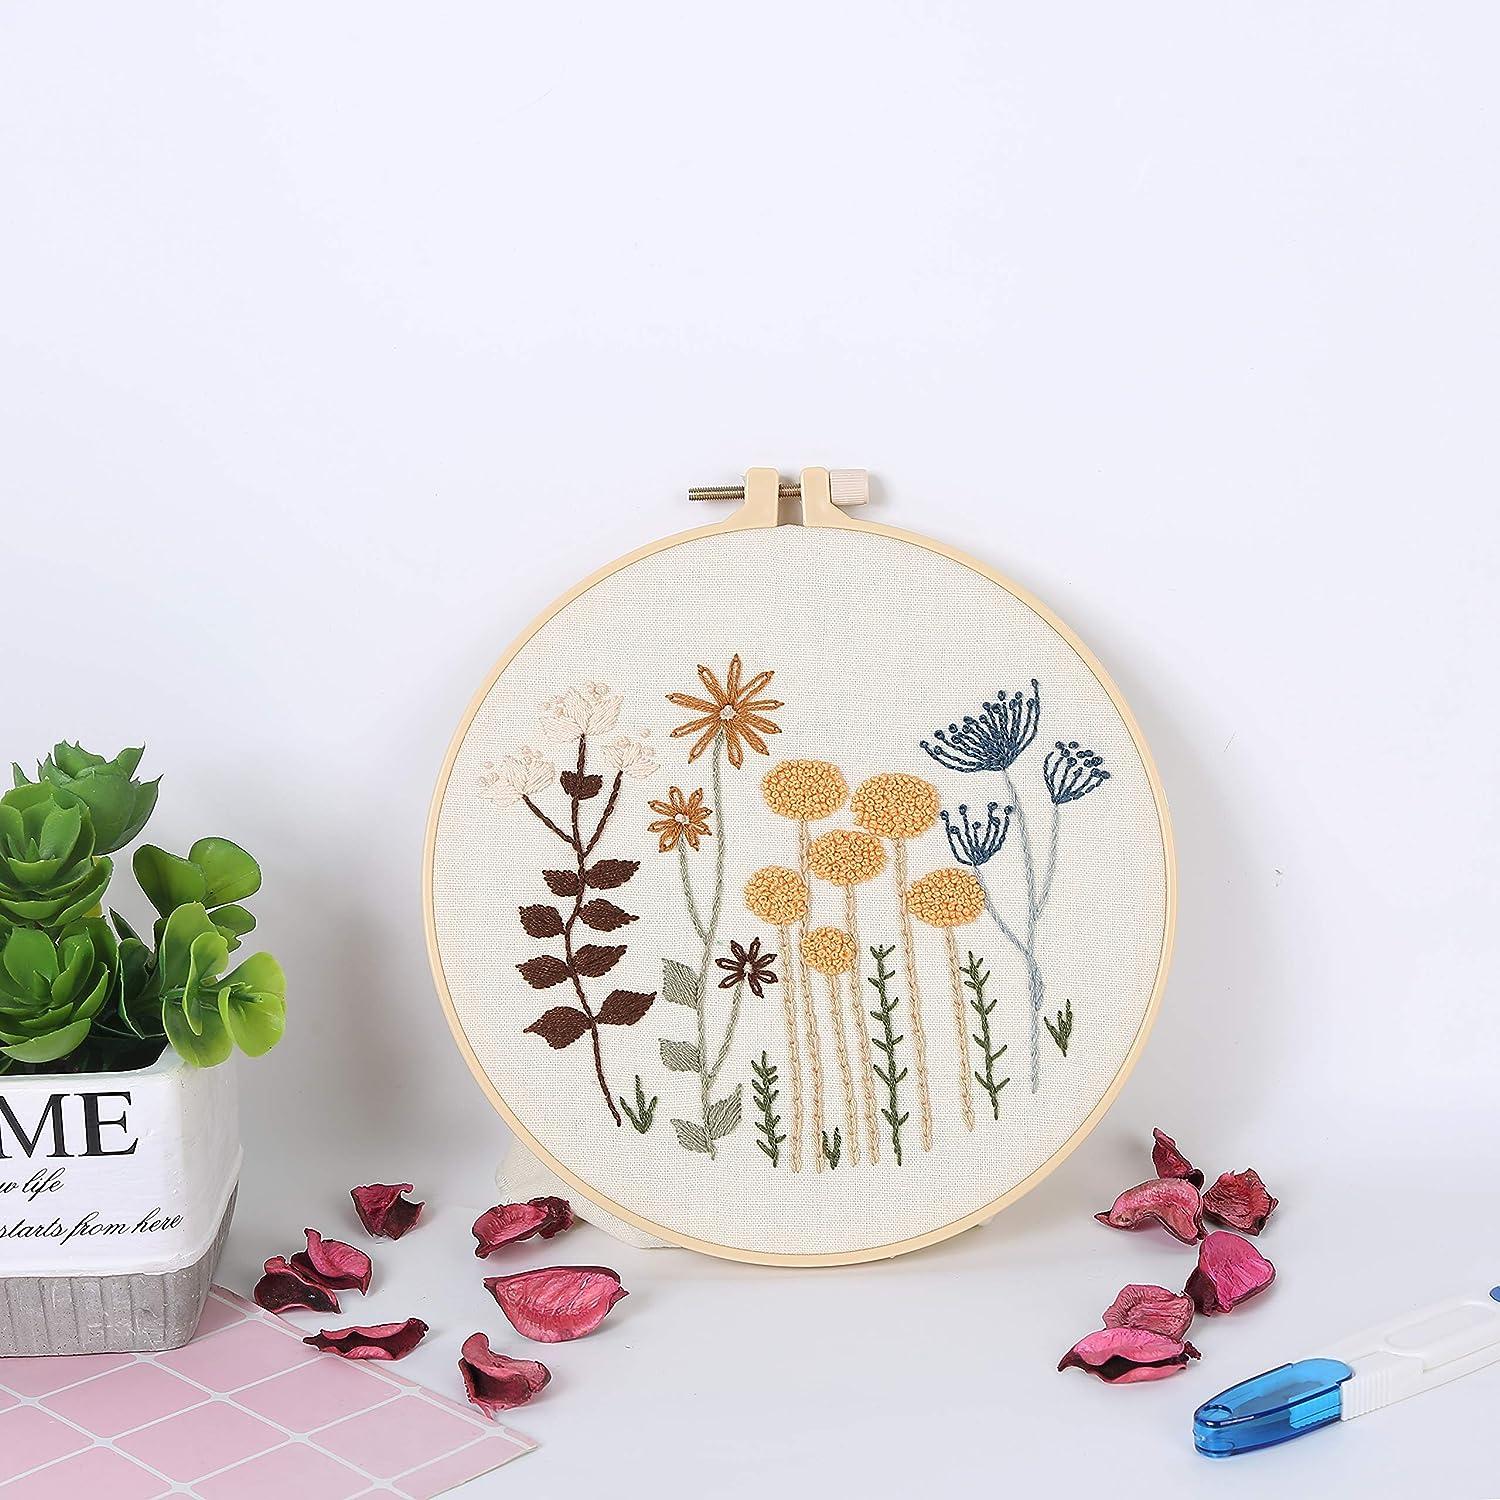 3 Sets of Beginner Embroidery Kits with 3 Patterns and 6 Needles